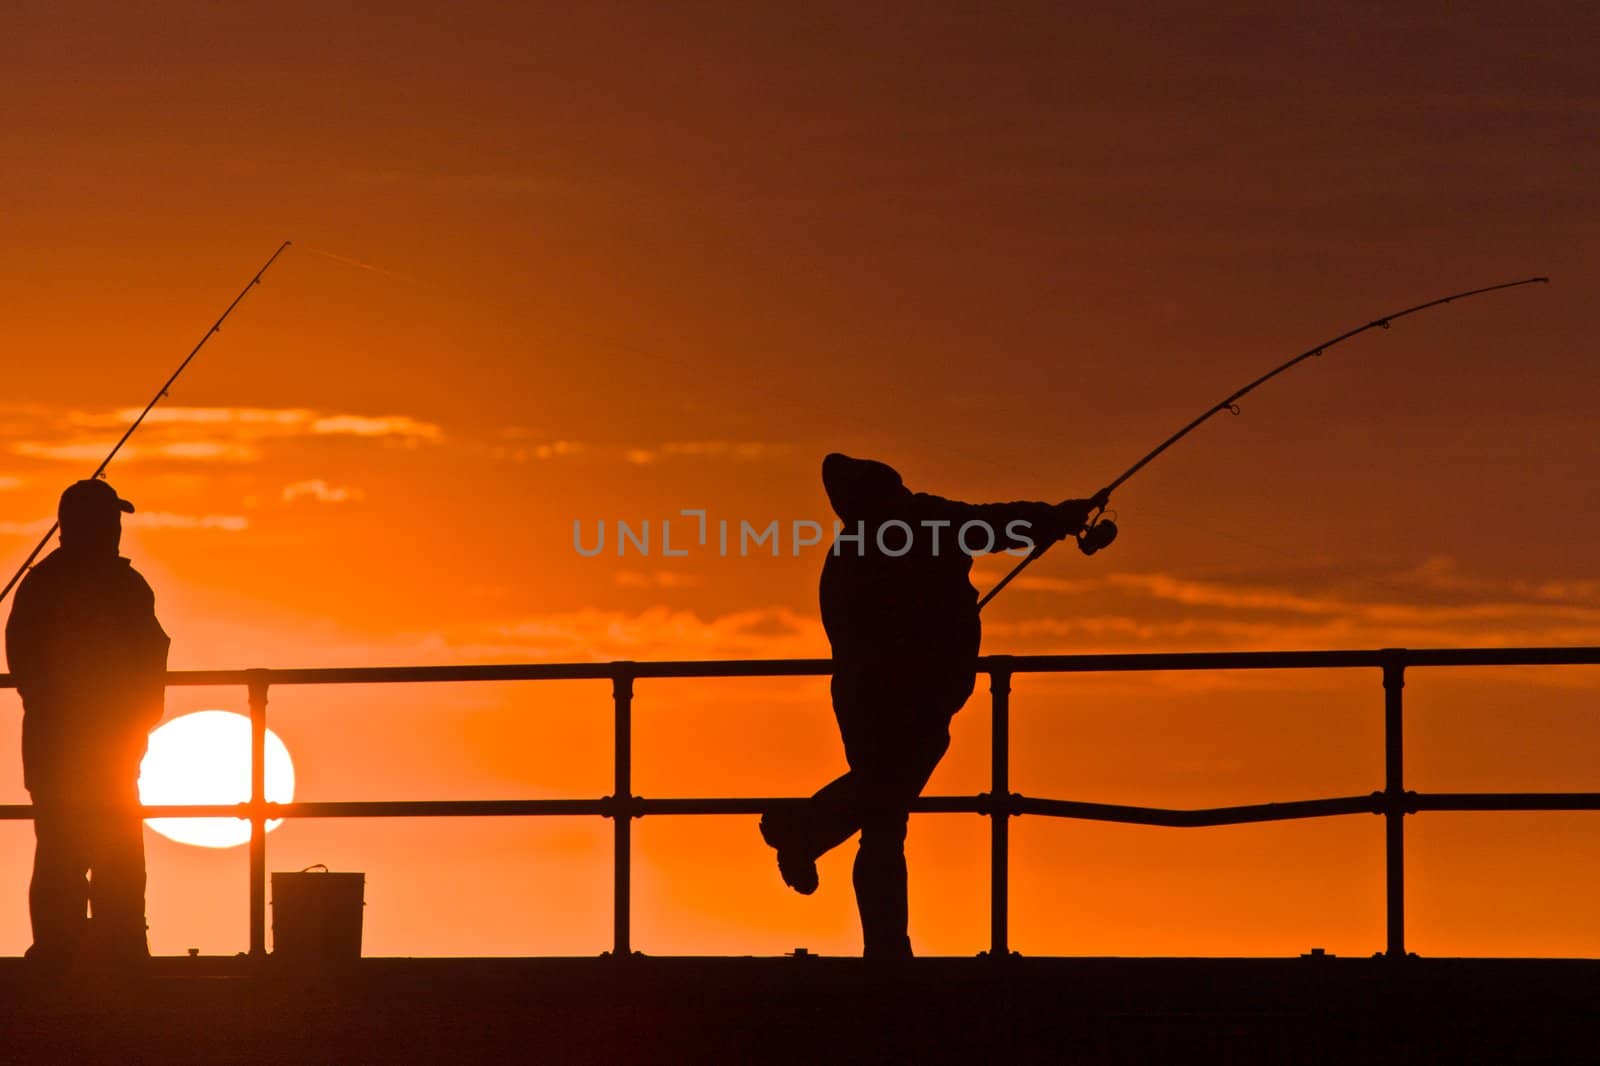 Men fishing, silhouettes with sunset